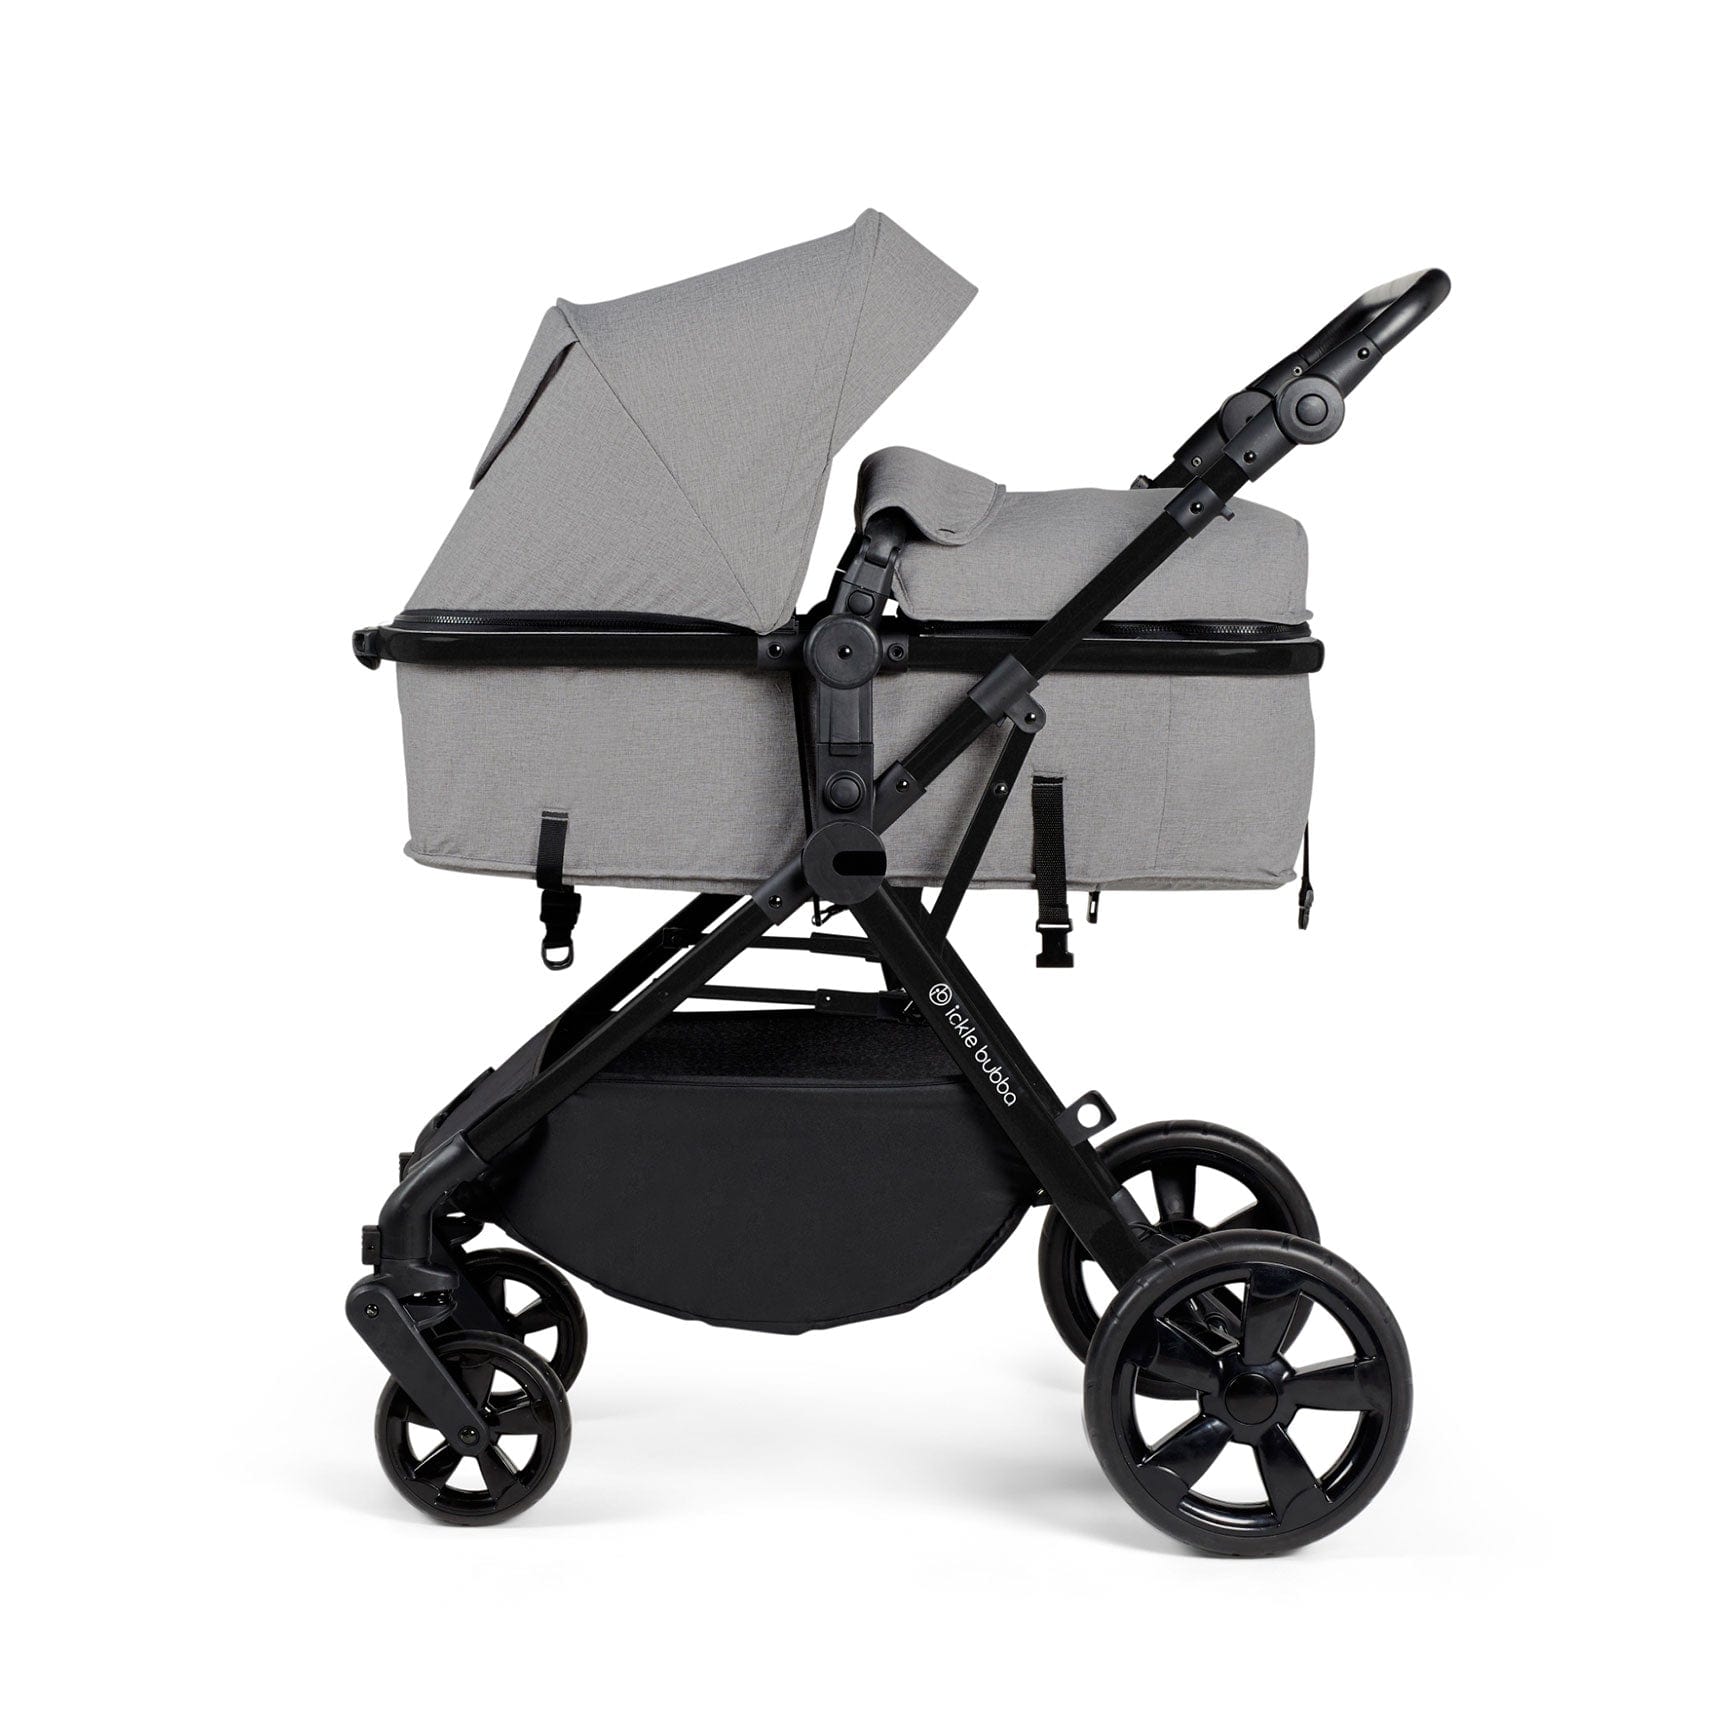 Ickle Bubba Comet 3-in-1 Travel System with Astral Car Seat in Space Grey Baby Prams 10-008-101-014 5056515025767